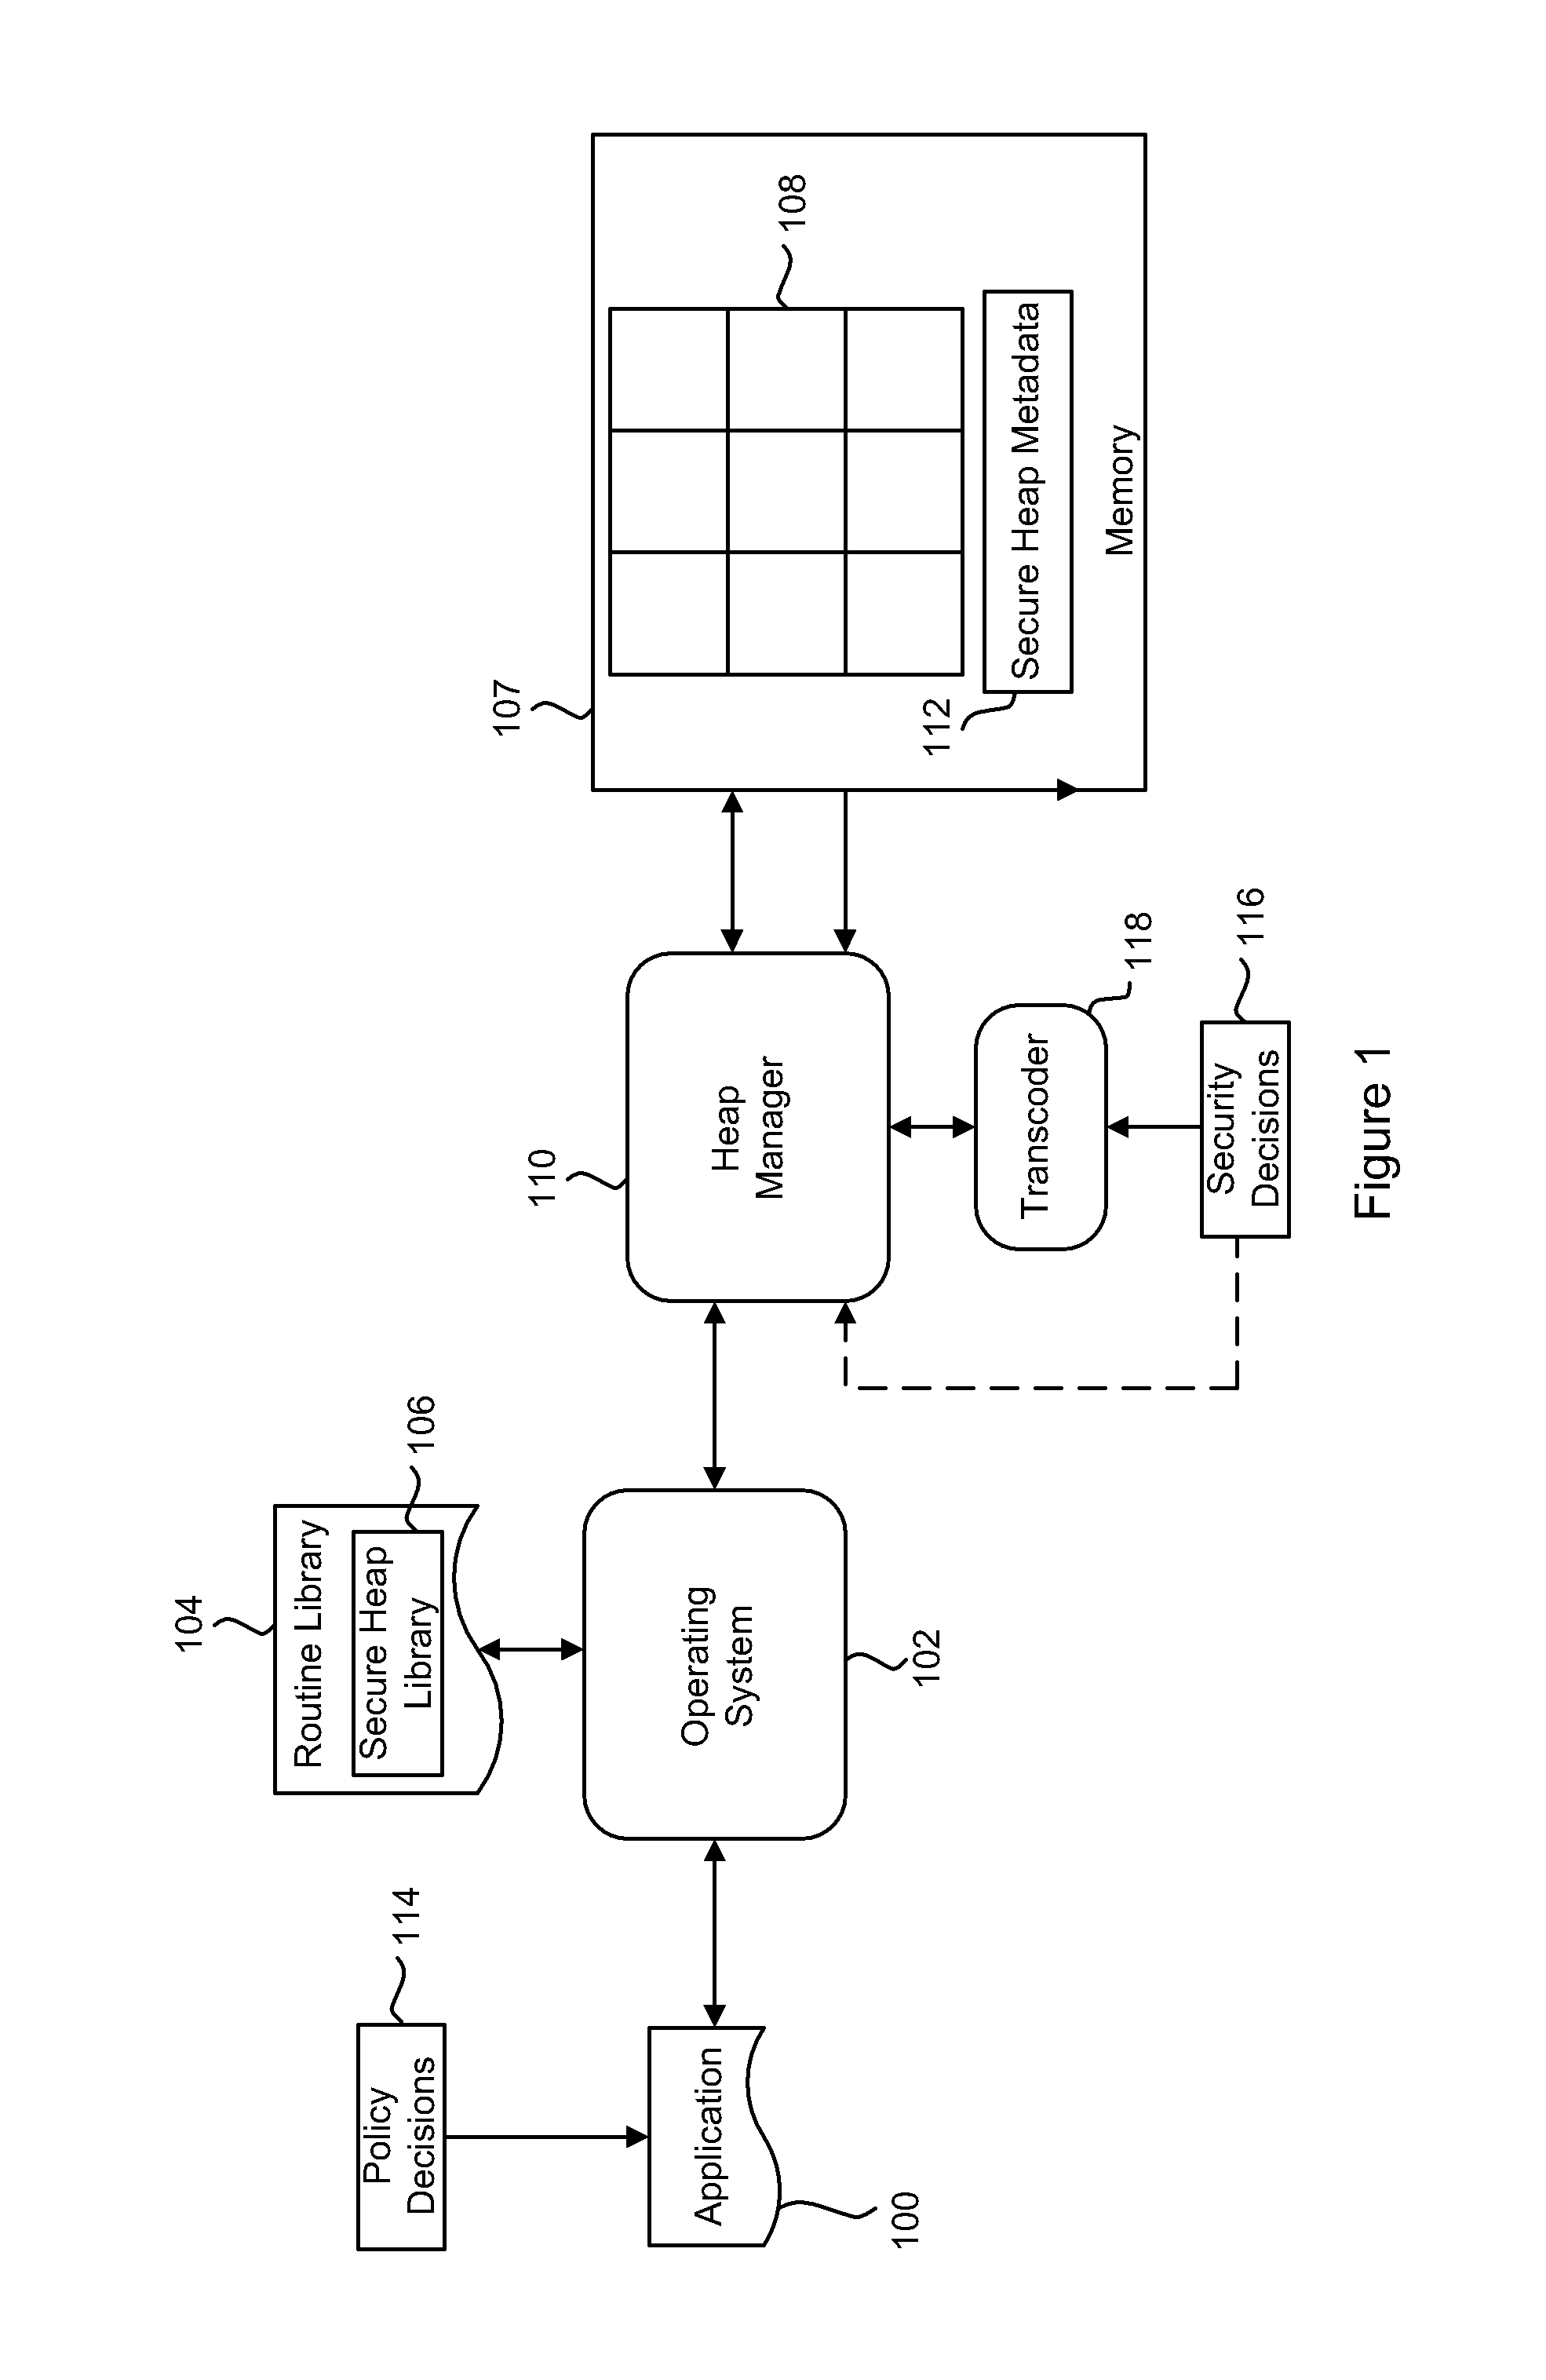 Method of Securing Memory Against Malicious Attack